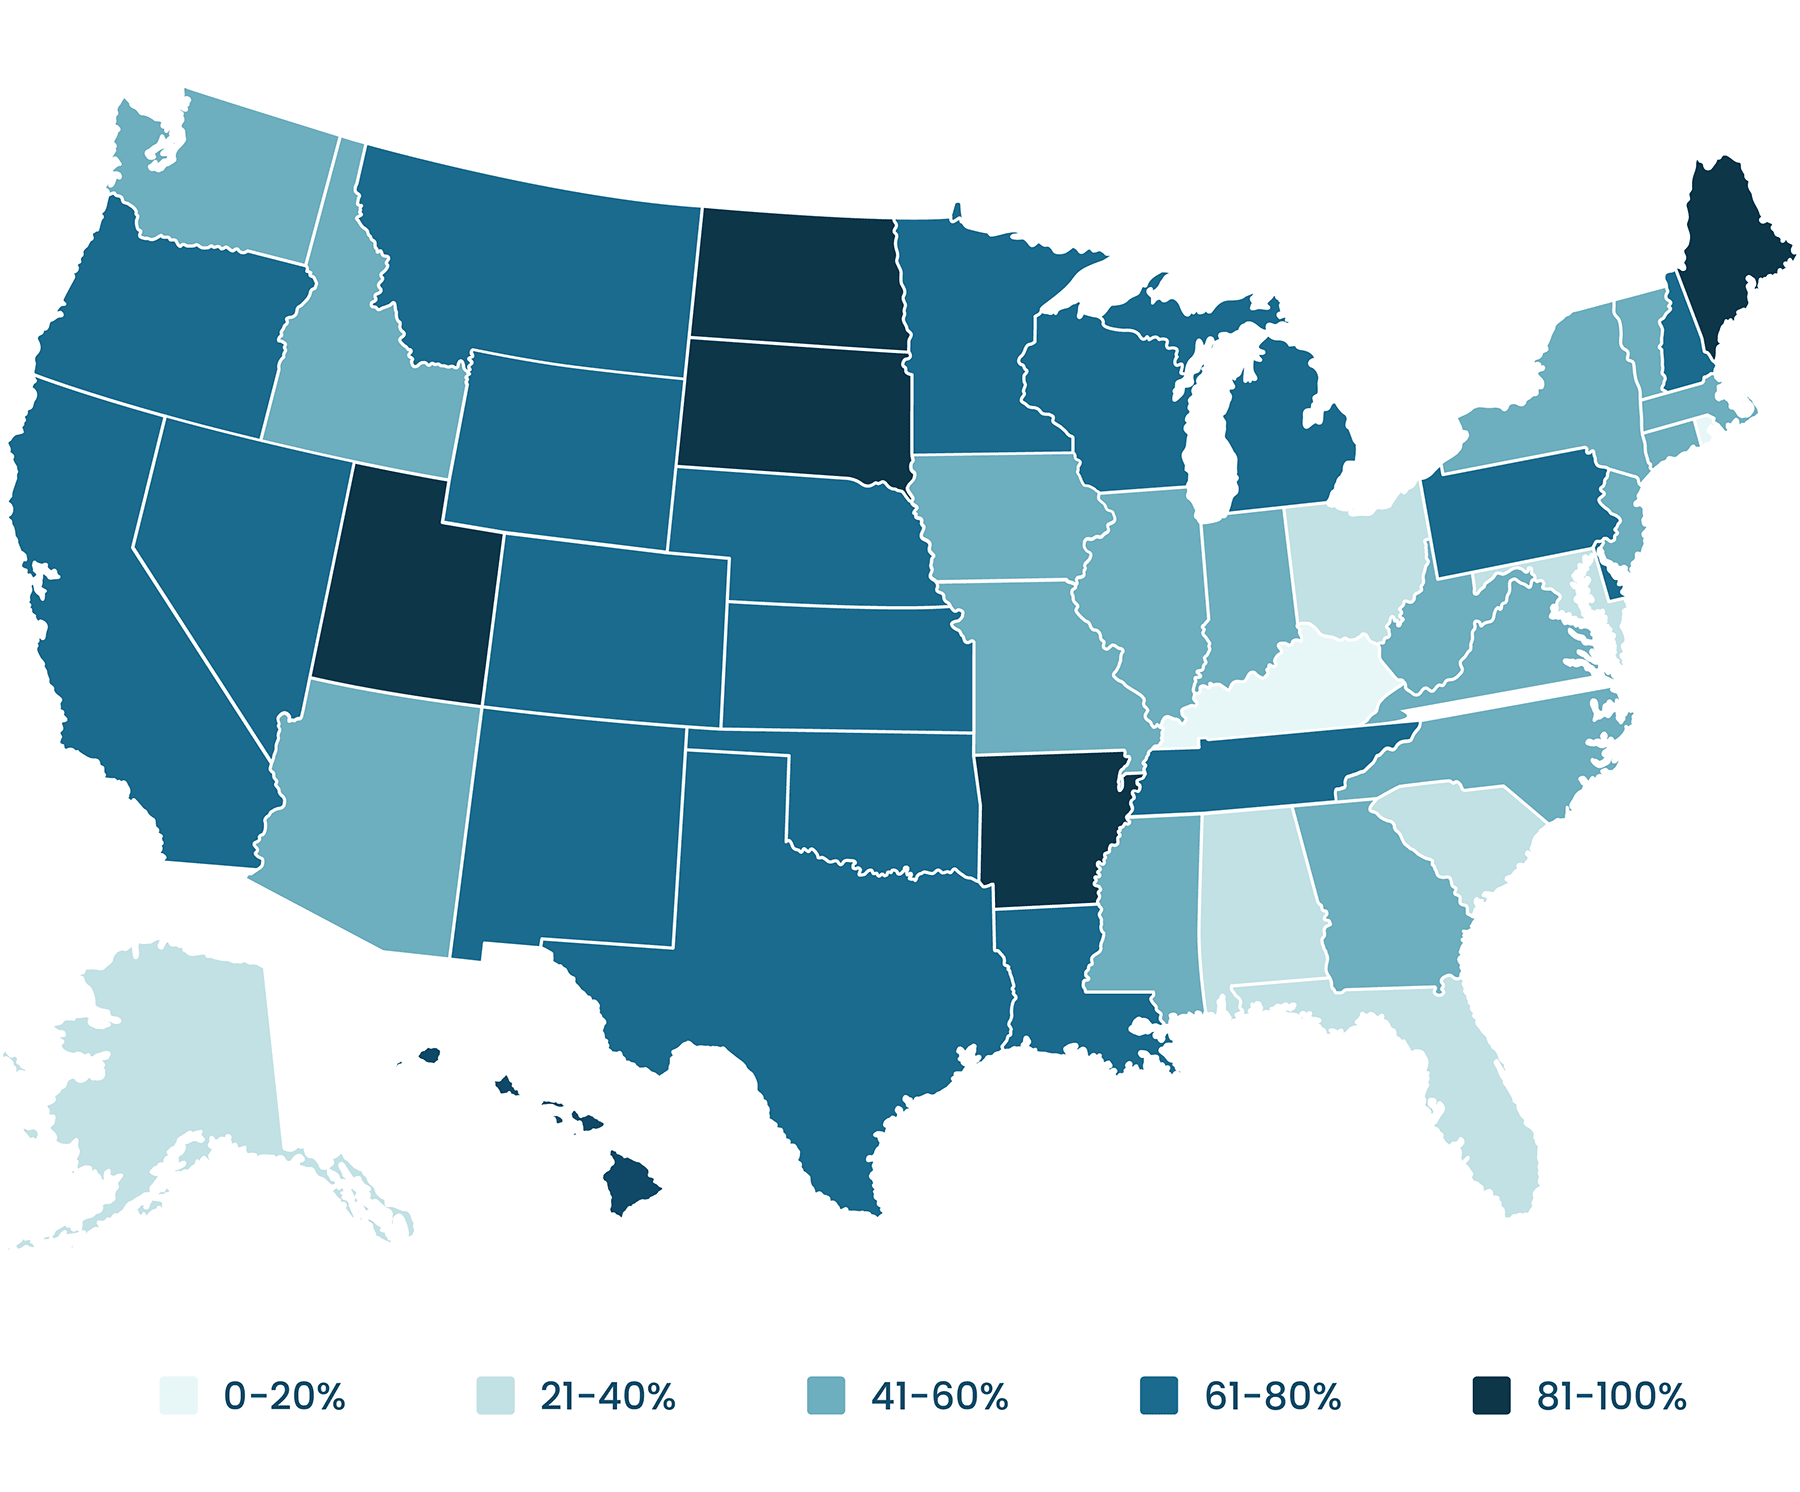 Percent of school districts meeting 1 Mbps/student by state